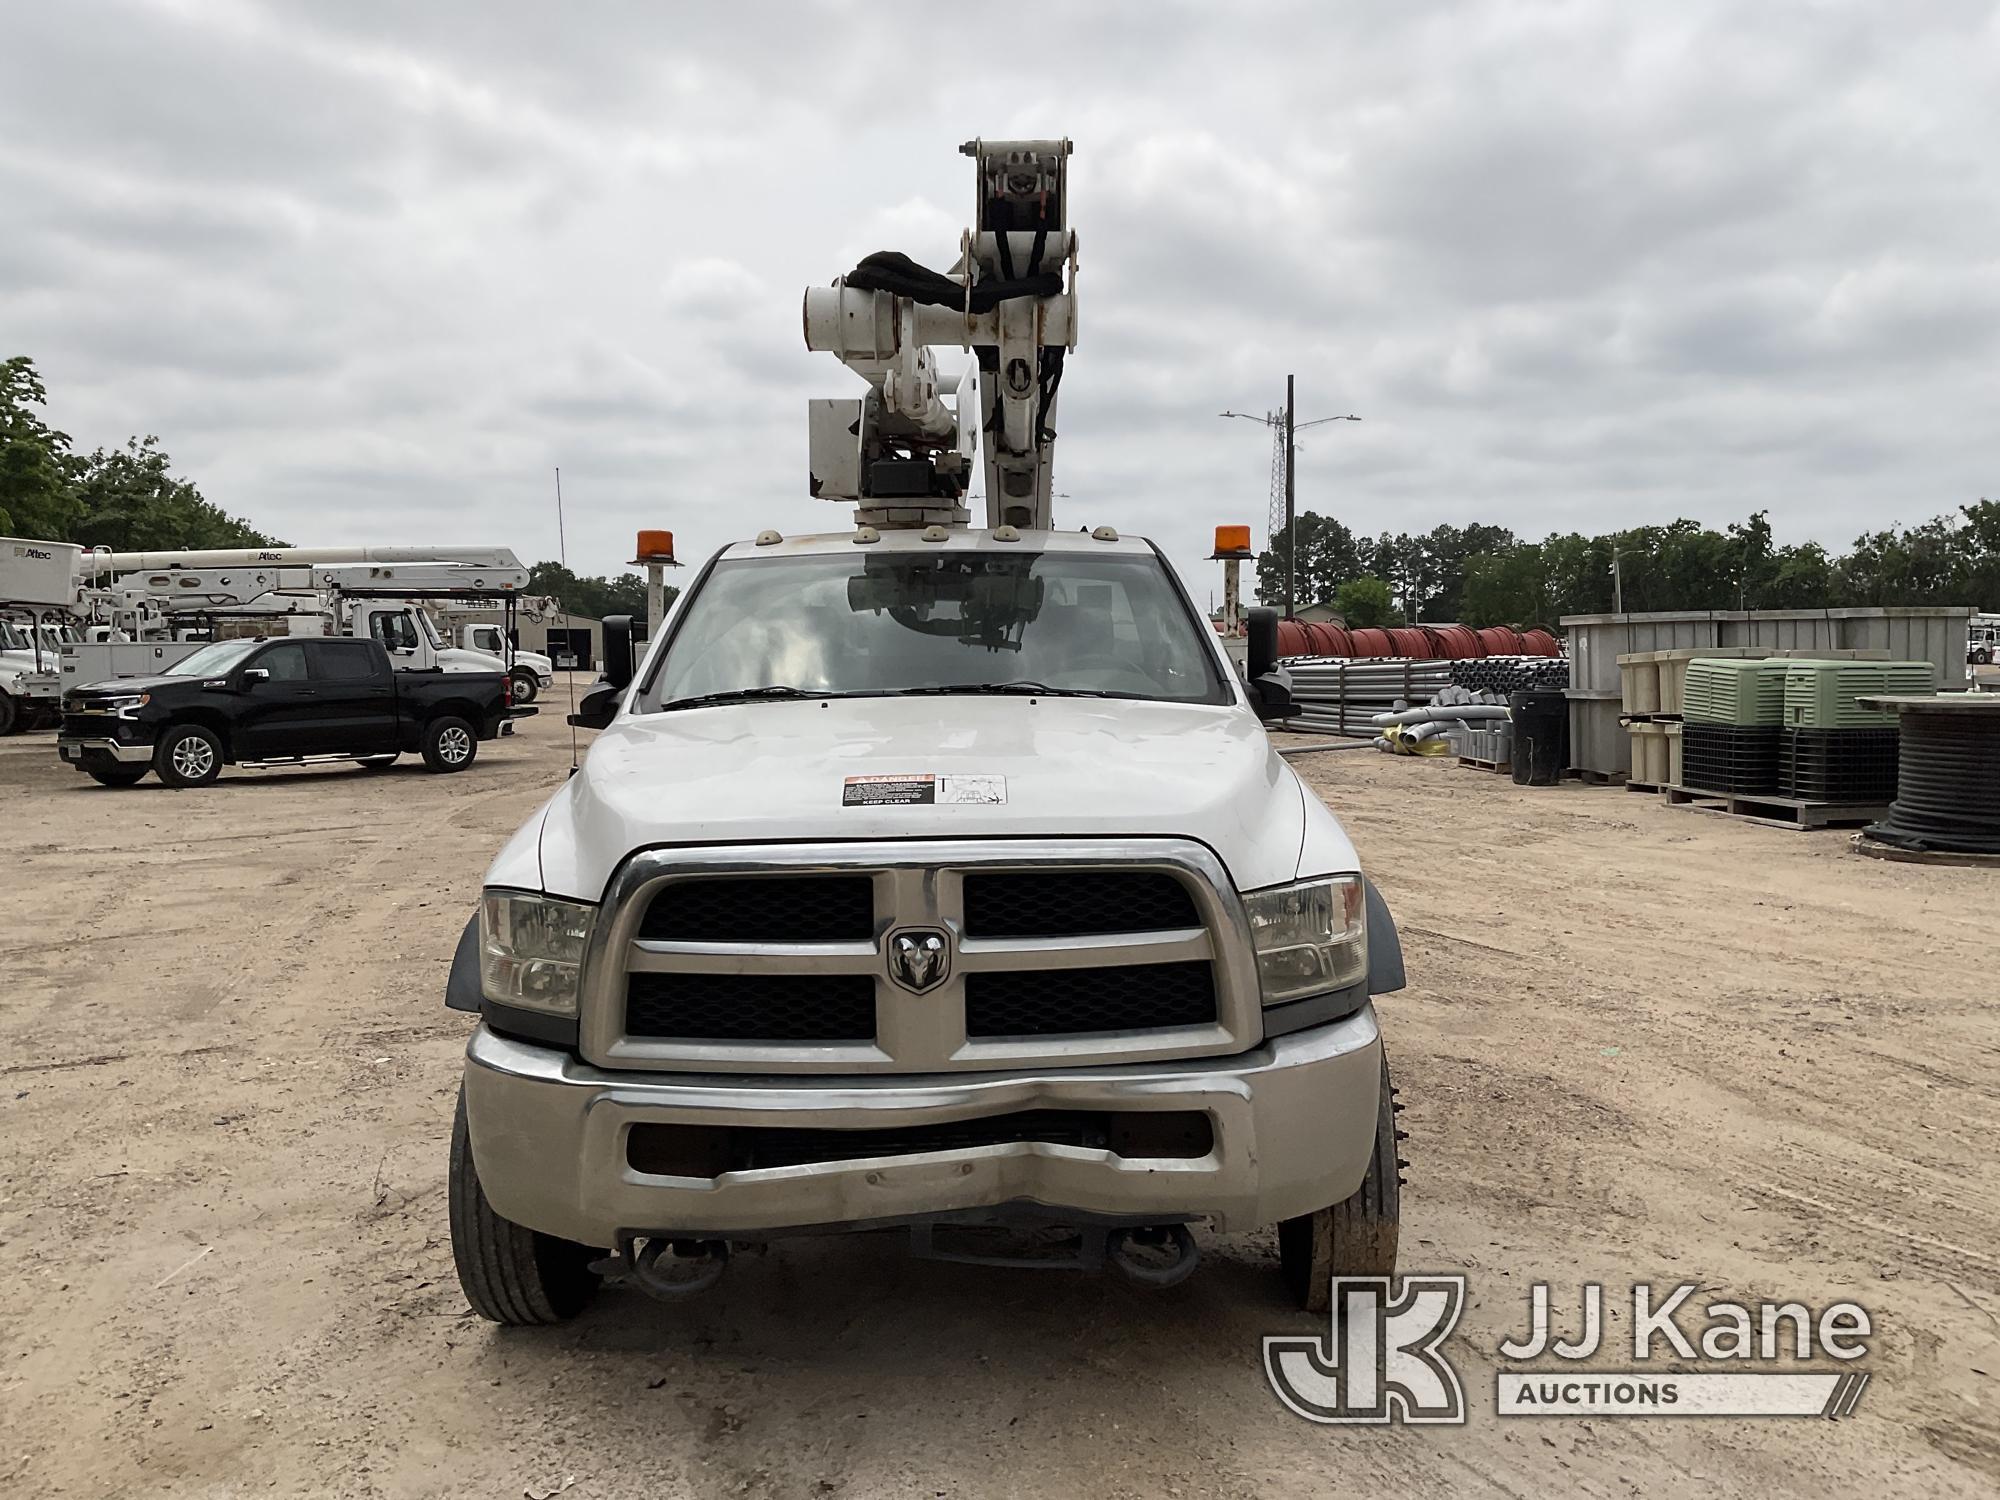 (Cypress, TX) Altec AT40-MH, Articulating & Telescopic Material Handling Bucket Truck mounted behind